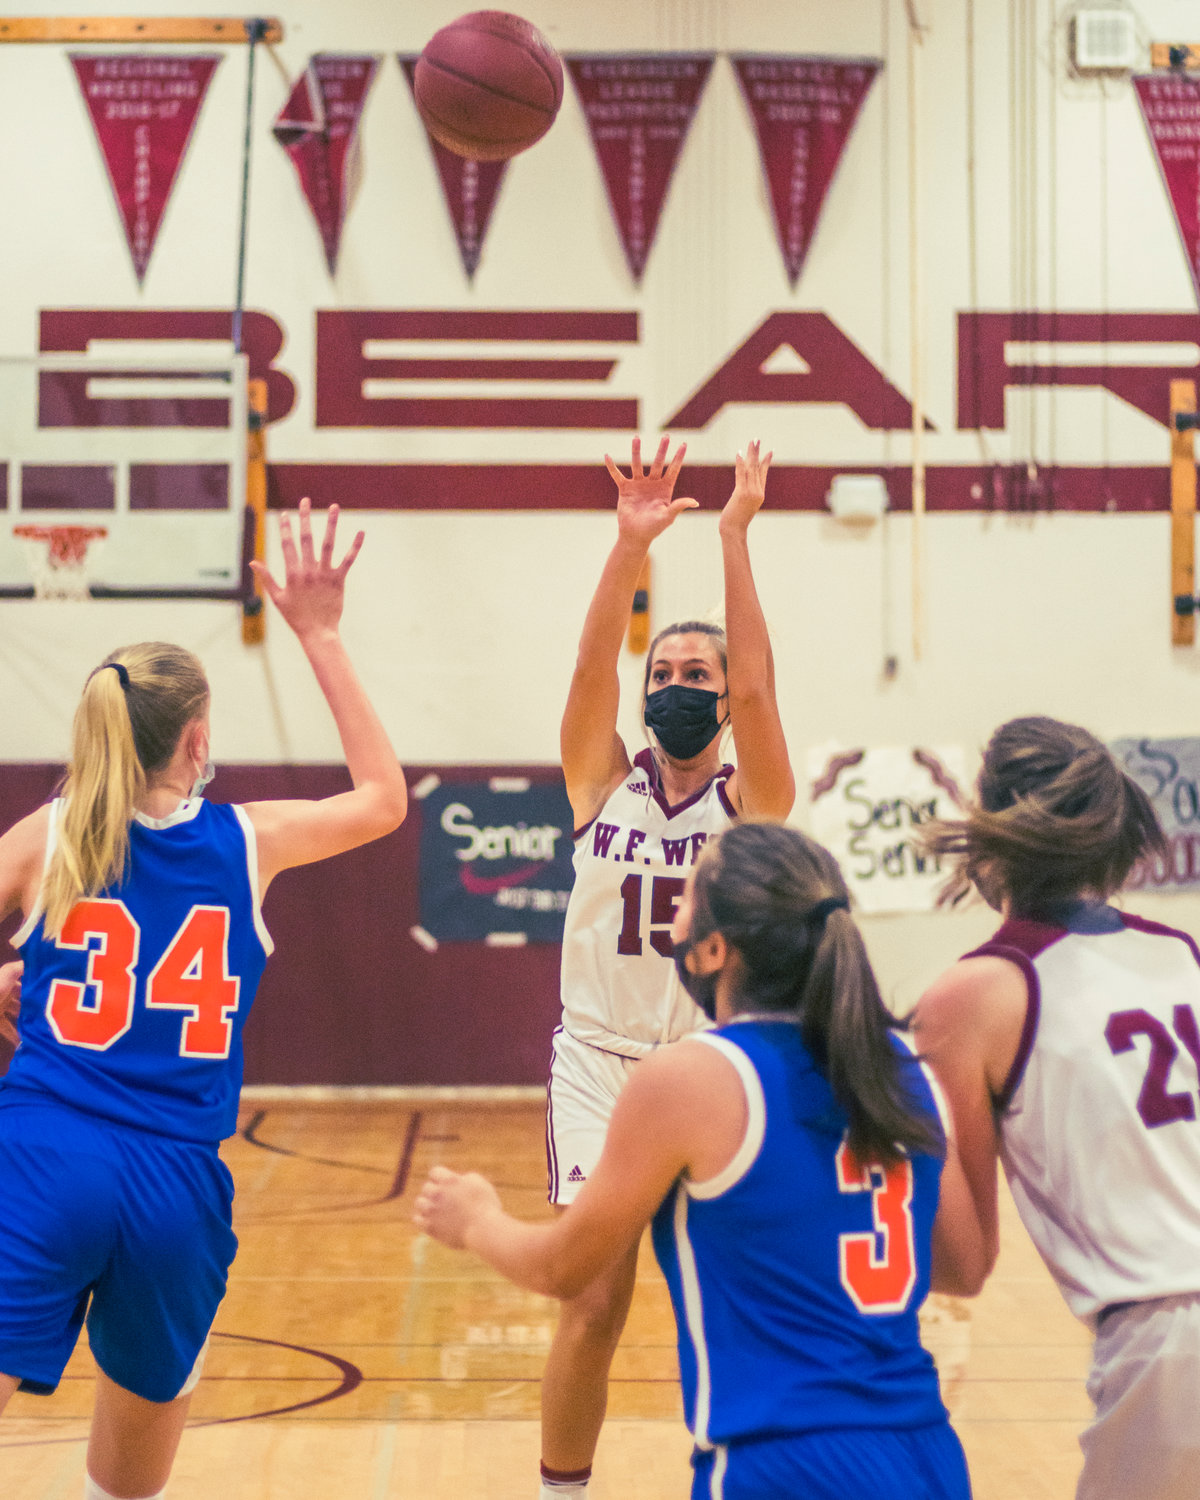 W.F. West's Madi Mencke (15) makes a deep shot during a game against Ridgefield in Chehalis Wednesday night.